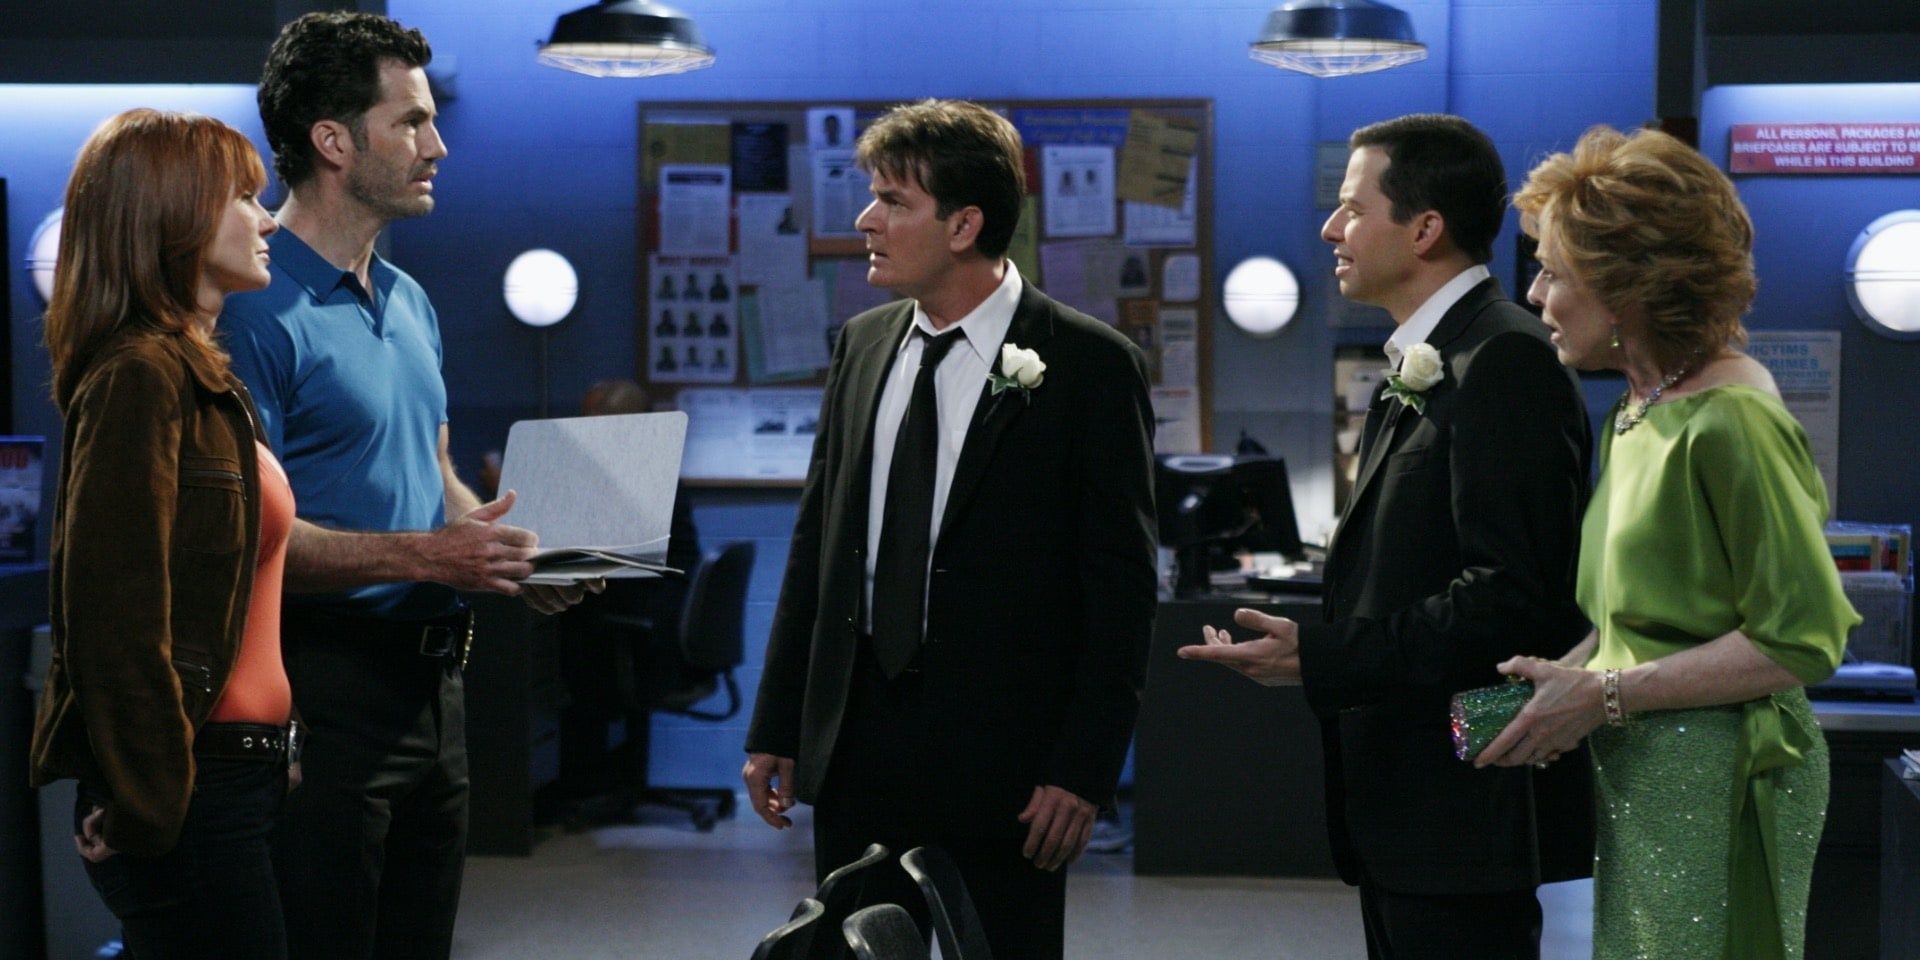 Charlie (Charlie Sheen), Alan (Jon Cryer), and Evelyn (Holland Taylor) speaking with detectives in Two and a Half Men episode Fish in a Drawer